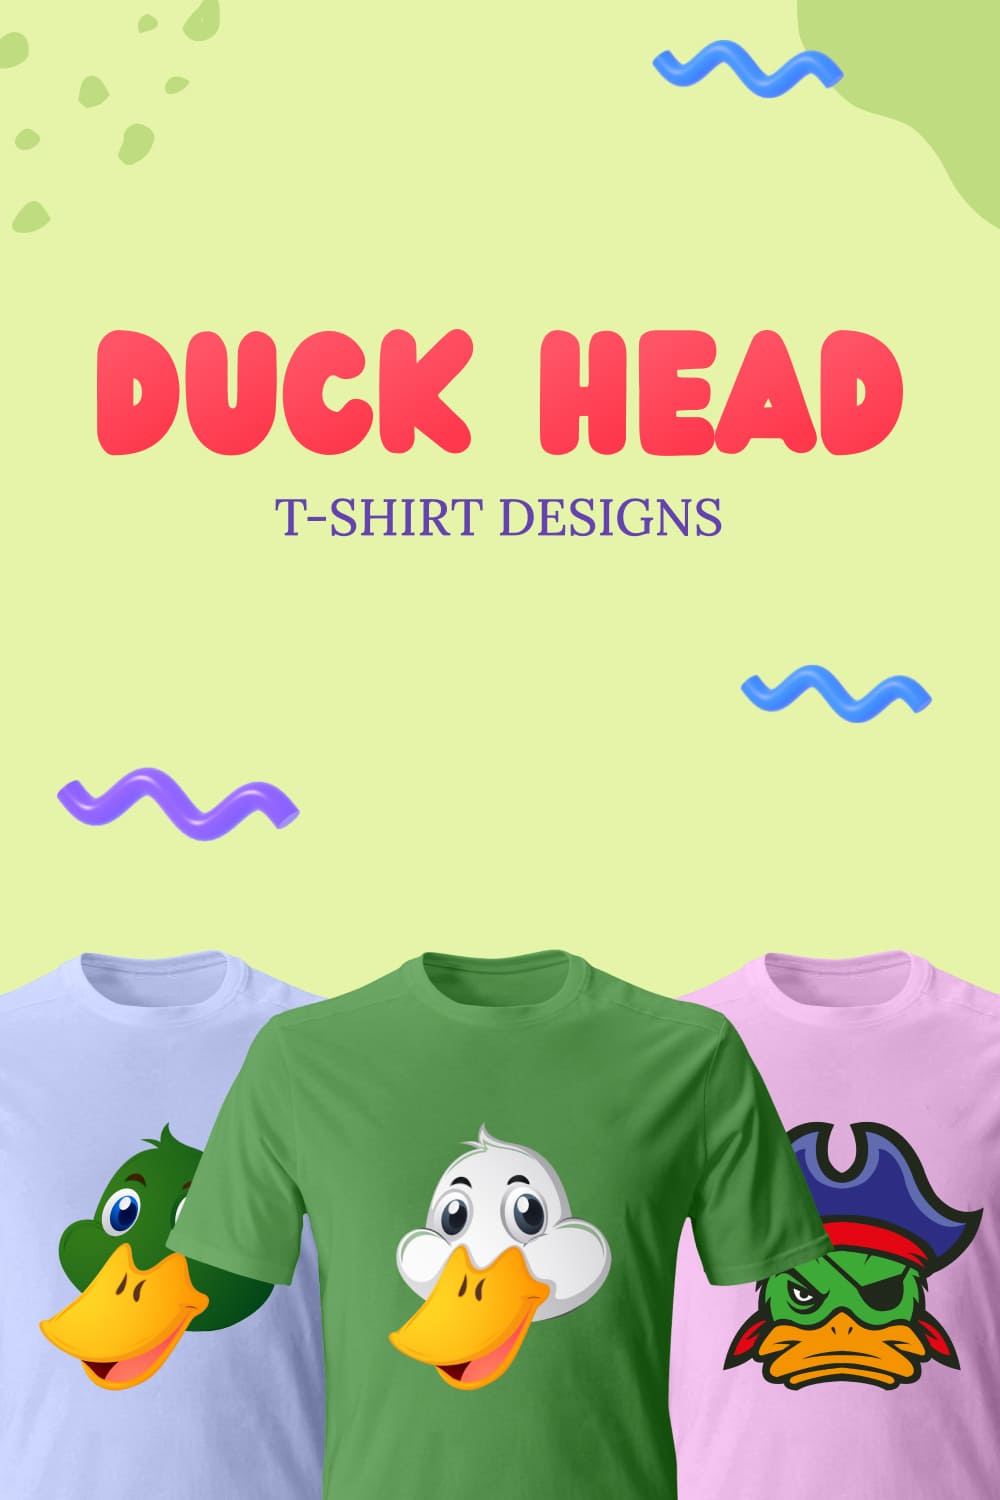 Bundle of images of t-shirts with wonderful prints of duck heads.